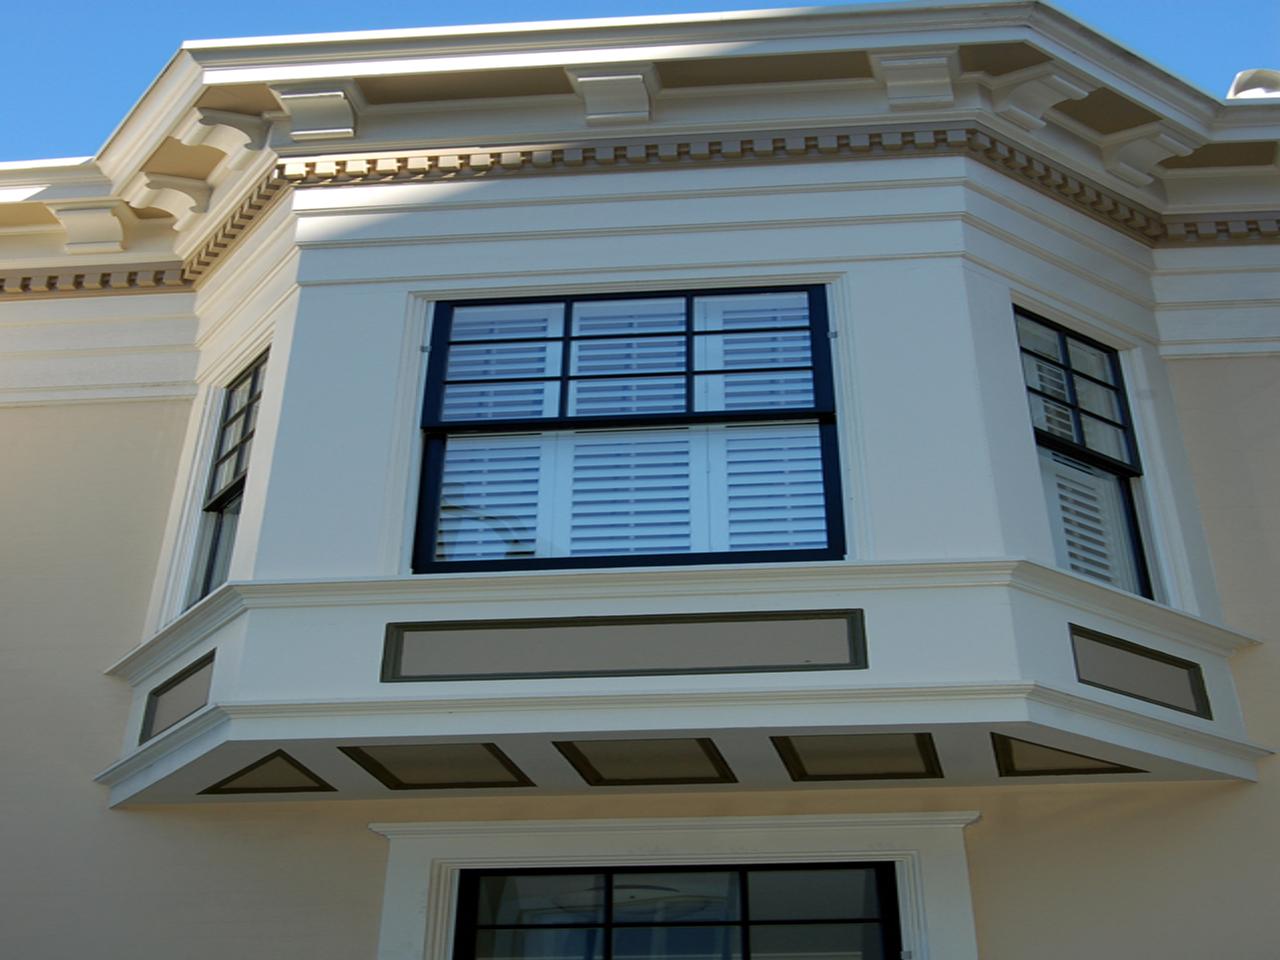 Outside view of plantation shutters on a bay window